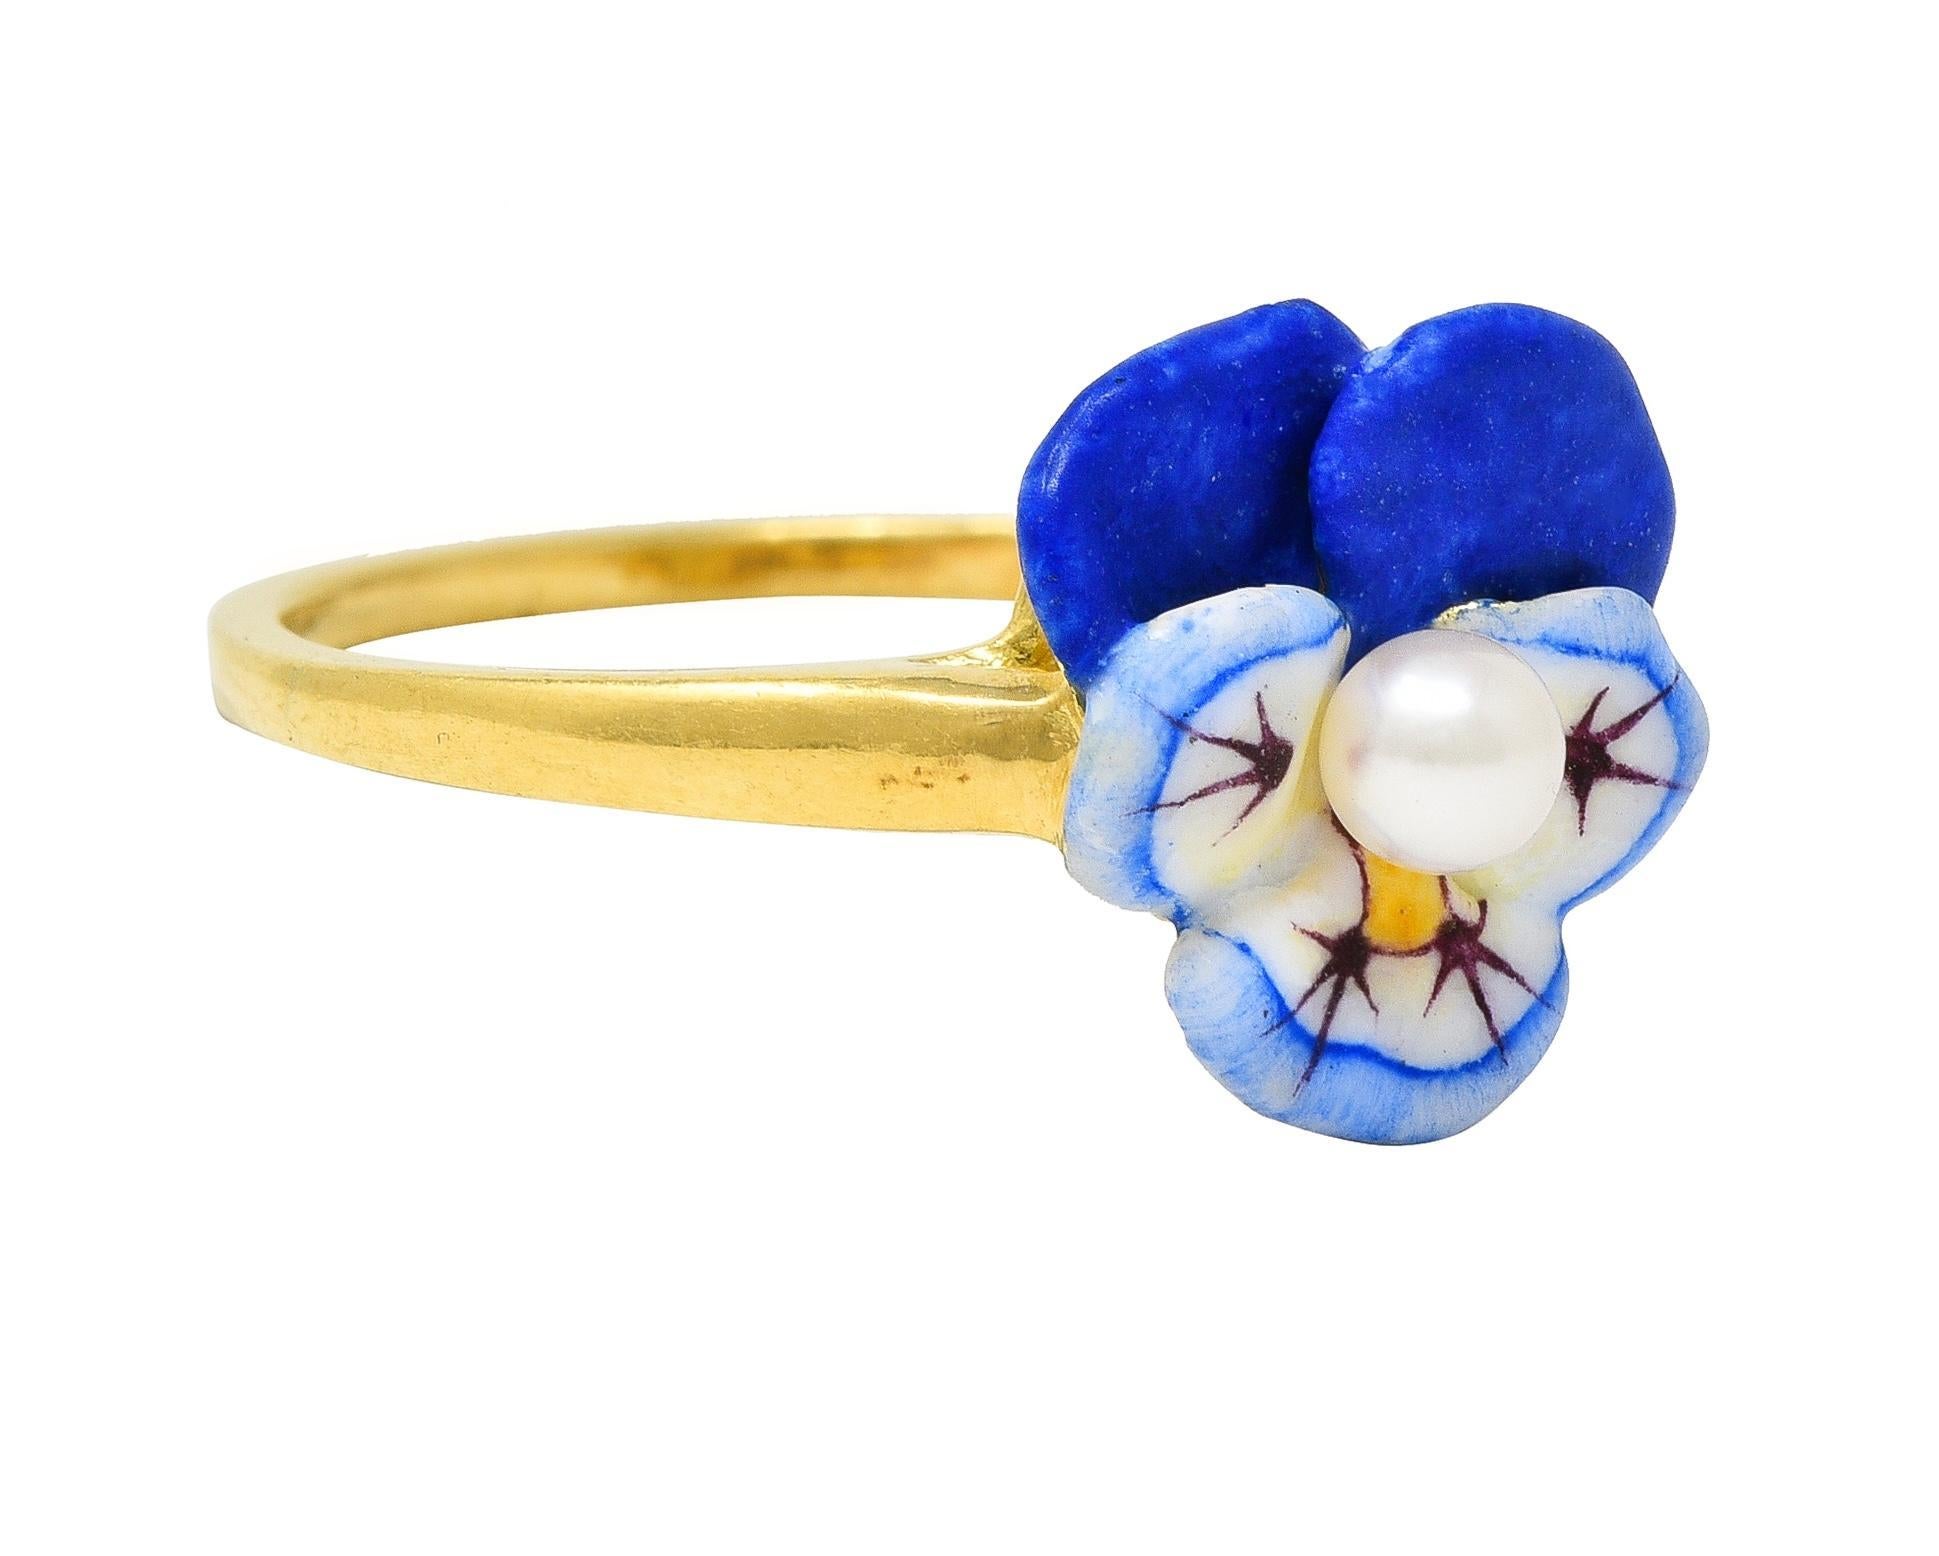 Designed as a dimensional pansy flower painted with opaque enamel 
White, blue, yellow, and maroon with minimal loss 
Centering a 3.0 mm round pearl-white with subtle iridescence
Completed by tapered yellow gold shank 
With high polish finish